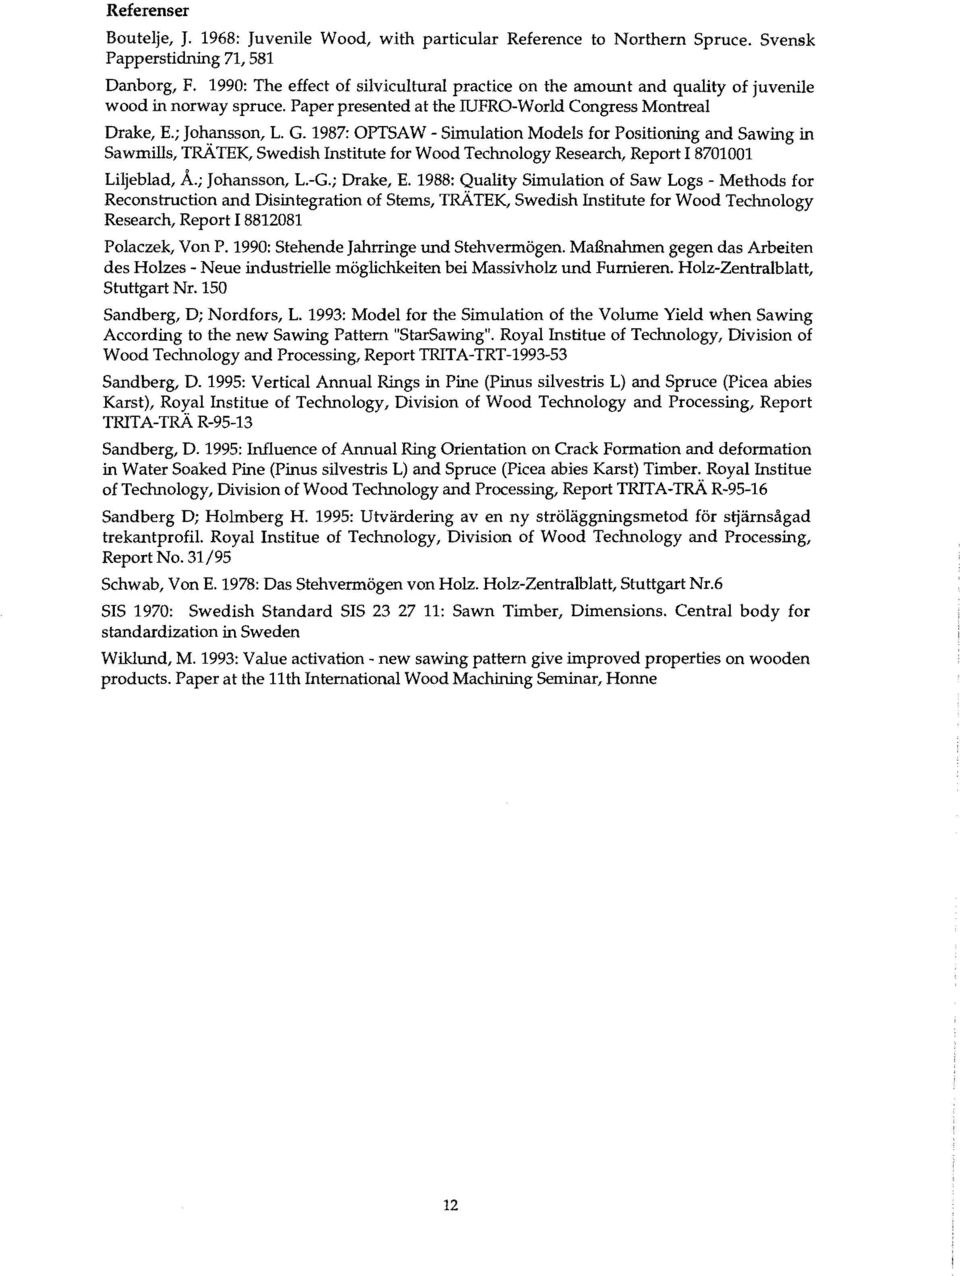 1987: OPTSAW - Simulation Models for Positioning and Sawing in Sawmills, TRATEK, Swedish Institute for Wood Technology Research, Report 18701001 Liljeblad, A.; Johansson, L.-G.; Drake, E.